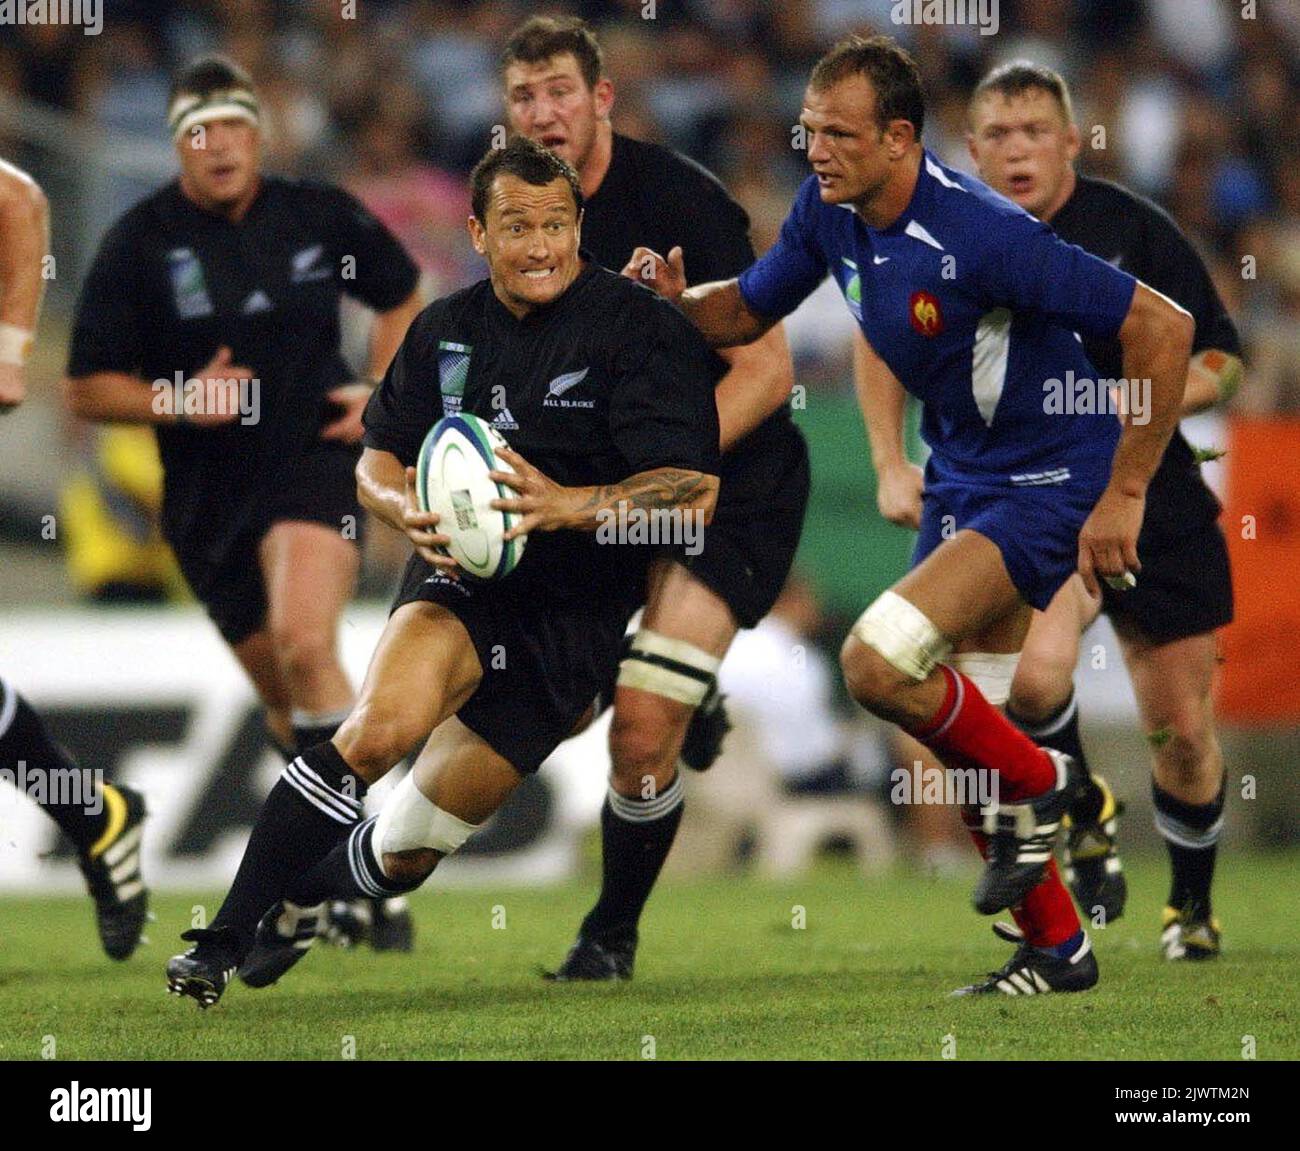 New Zealands Carlos Spencer runs the ball during the Rugby World Cup third place play-off match between France and New Zealand at Telstra Stadium in Sydney tonight